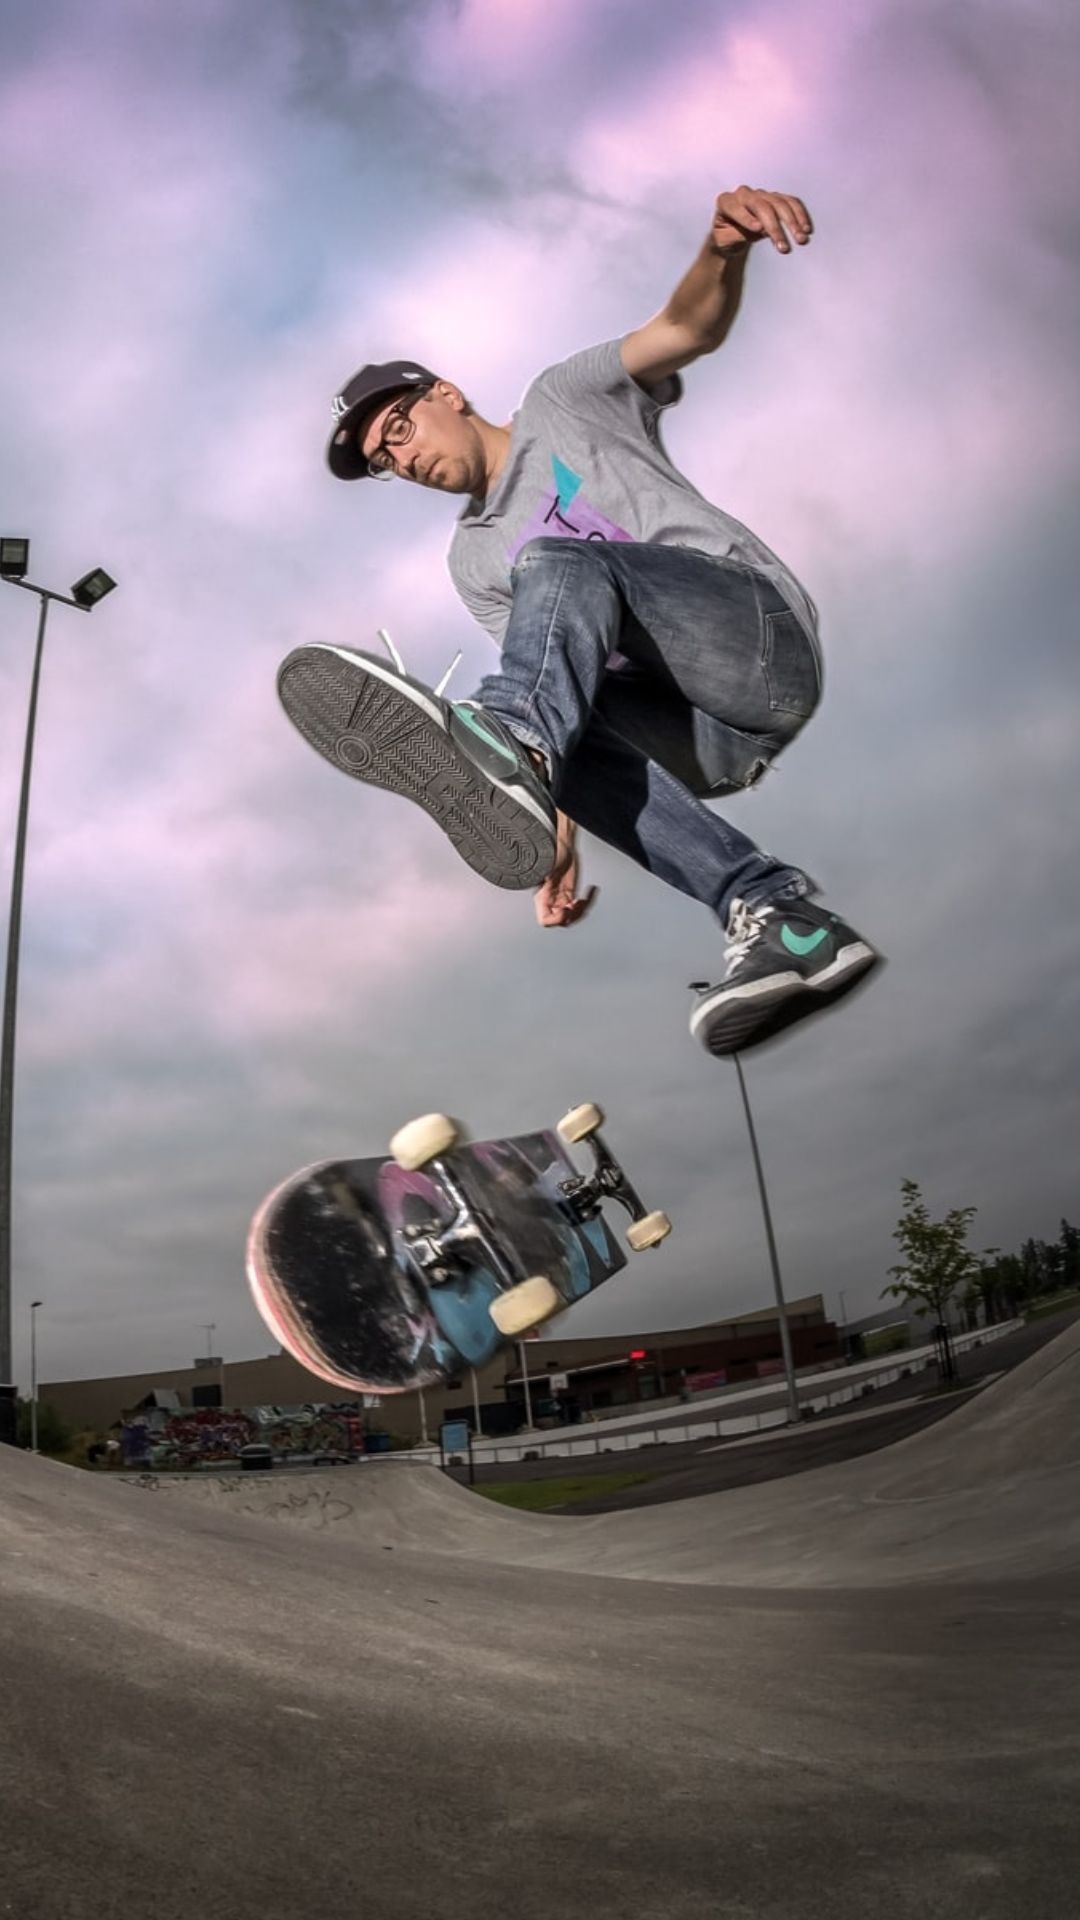 Skateboarding: Professional skater performs a trick using a modern skateboard, Action sport. 1080x1920 Full HD Background.